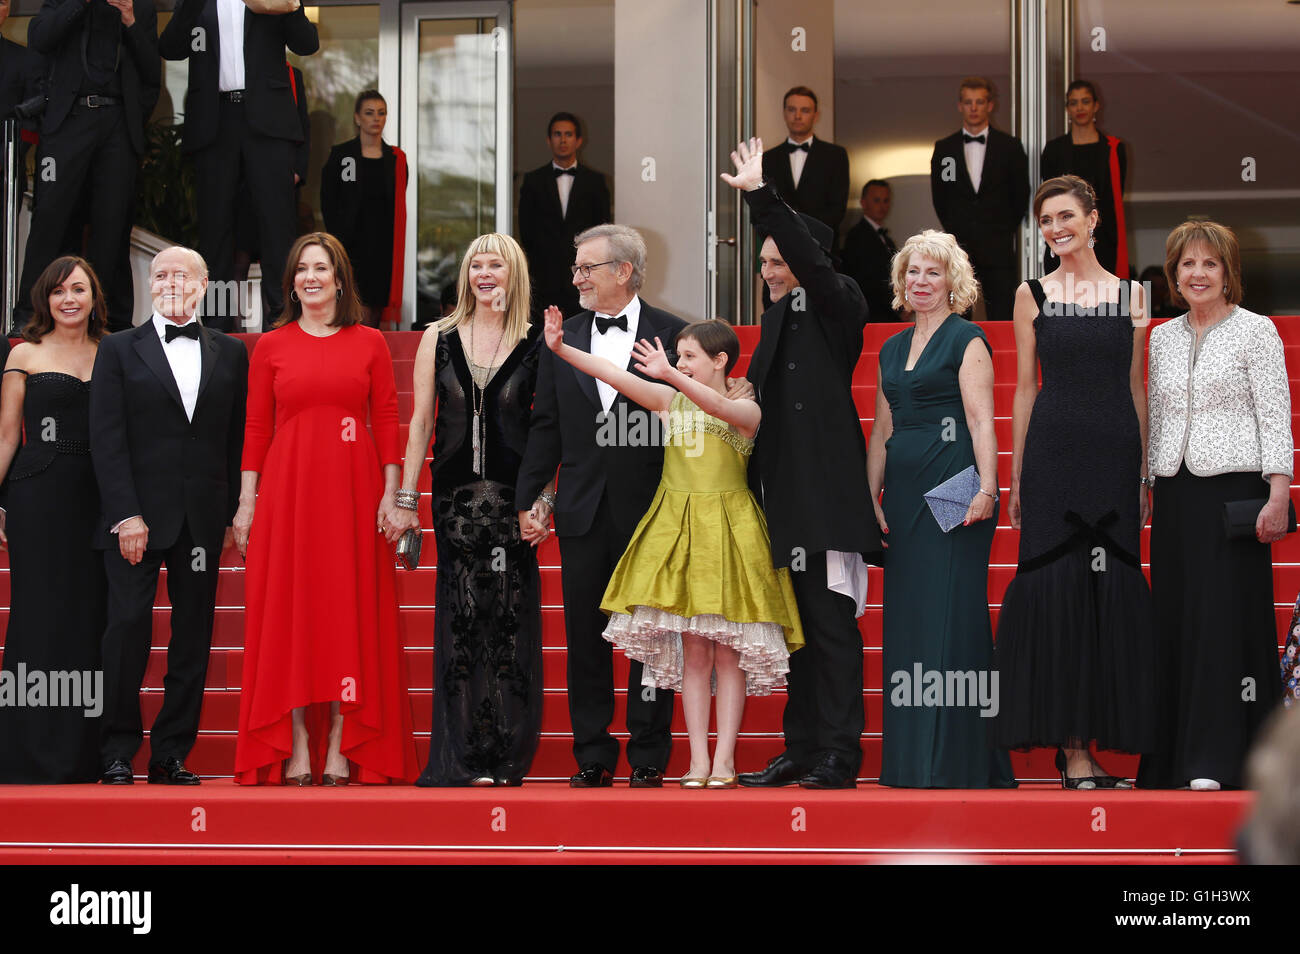 Kristie Macosko, Frank Marshall, Kathleen Kennedy, Kate Capshaw, Steven Spielberg, Ruby Barnhill, Mark Rylance, Claire van Kampen, Lucy Dahl and Penelope Wilton attending the 'The BFG' premiere during the 69th Cannes Film Festival at the Palais des Festivals in Cannes on May 14, 2016 | usage worldwide Stock Photo